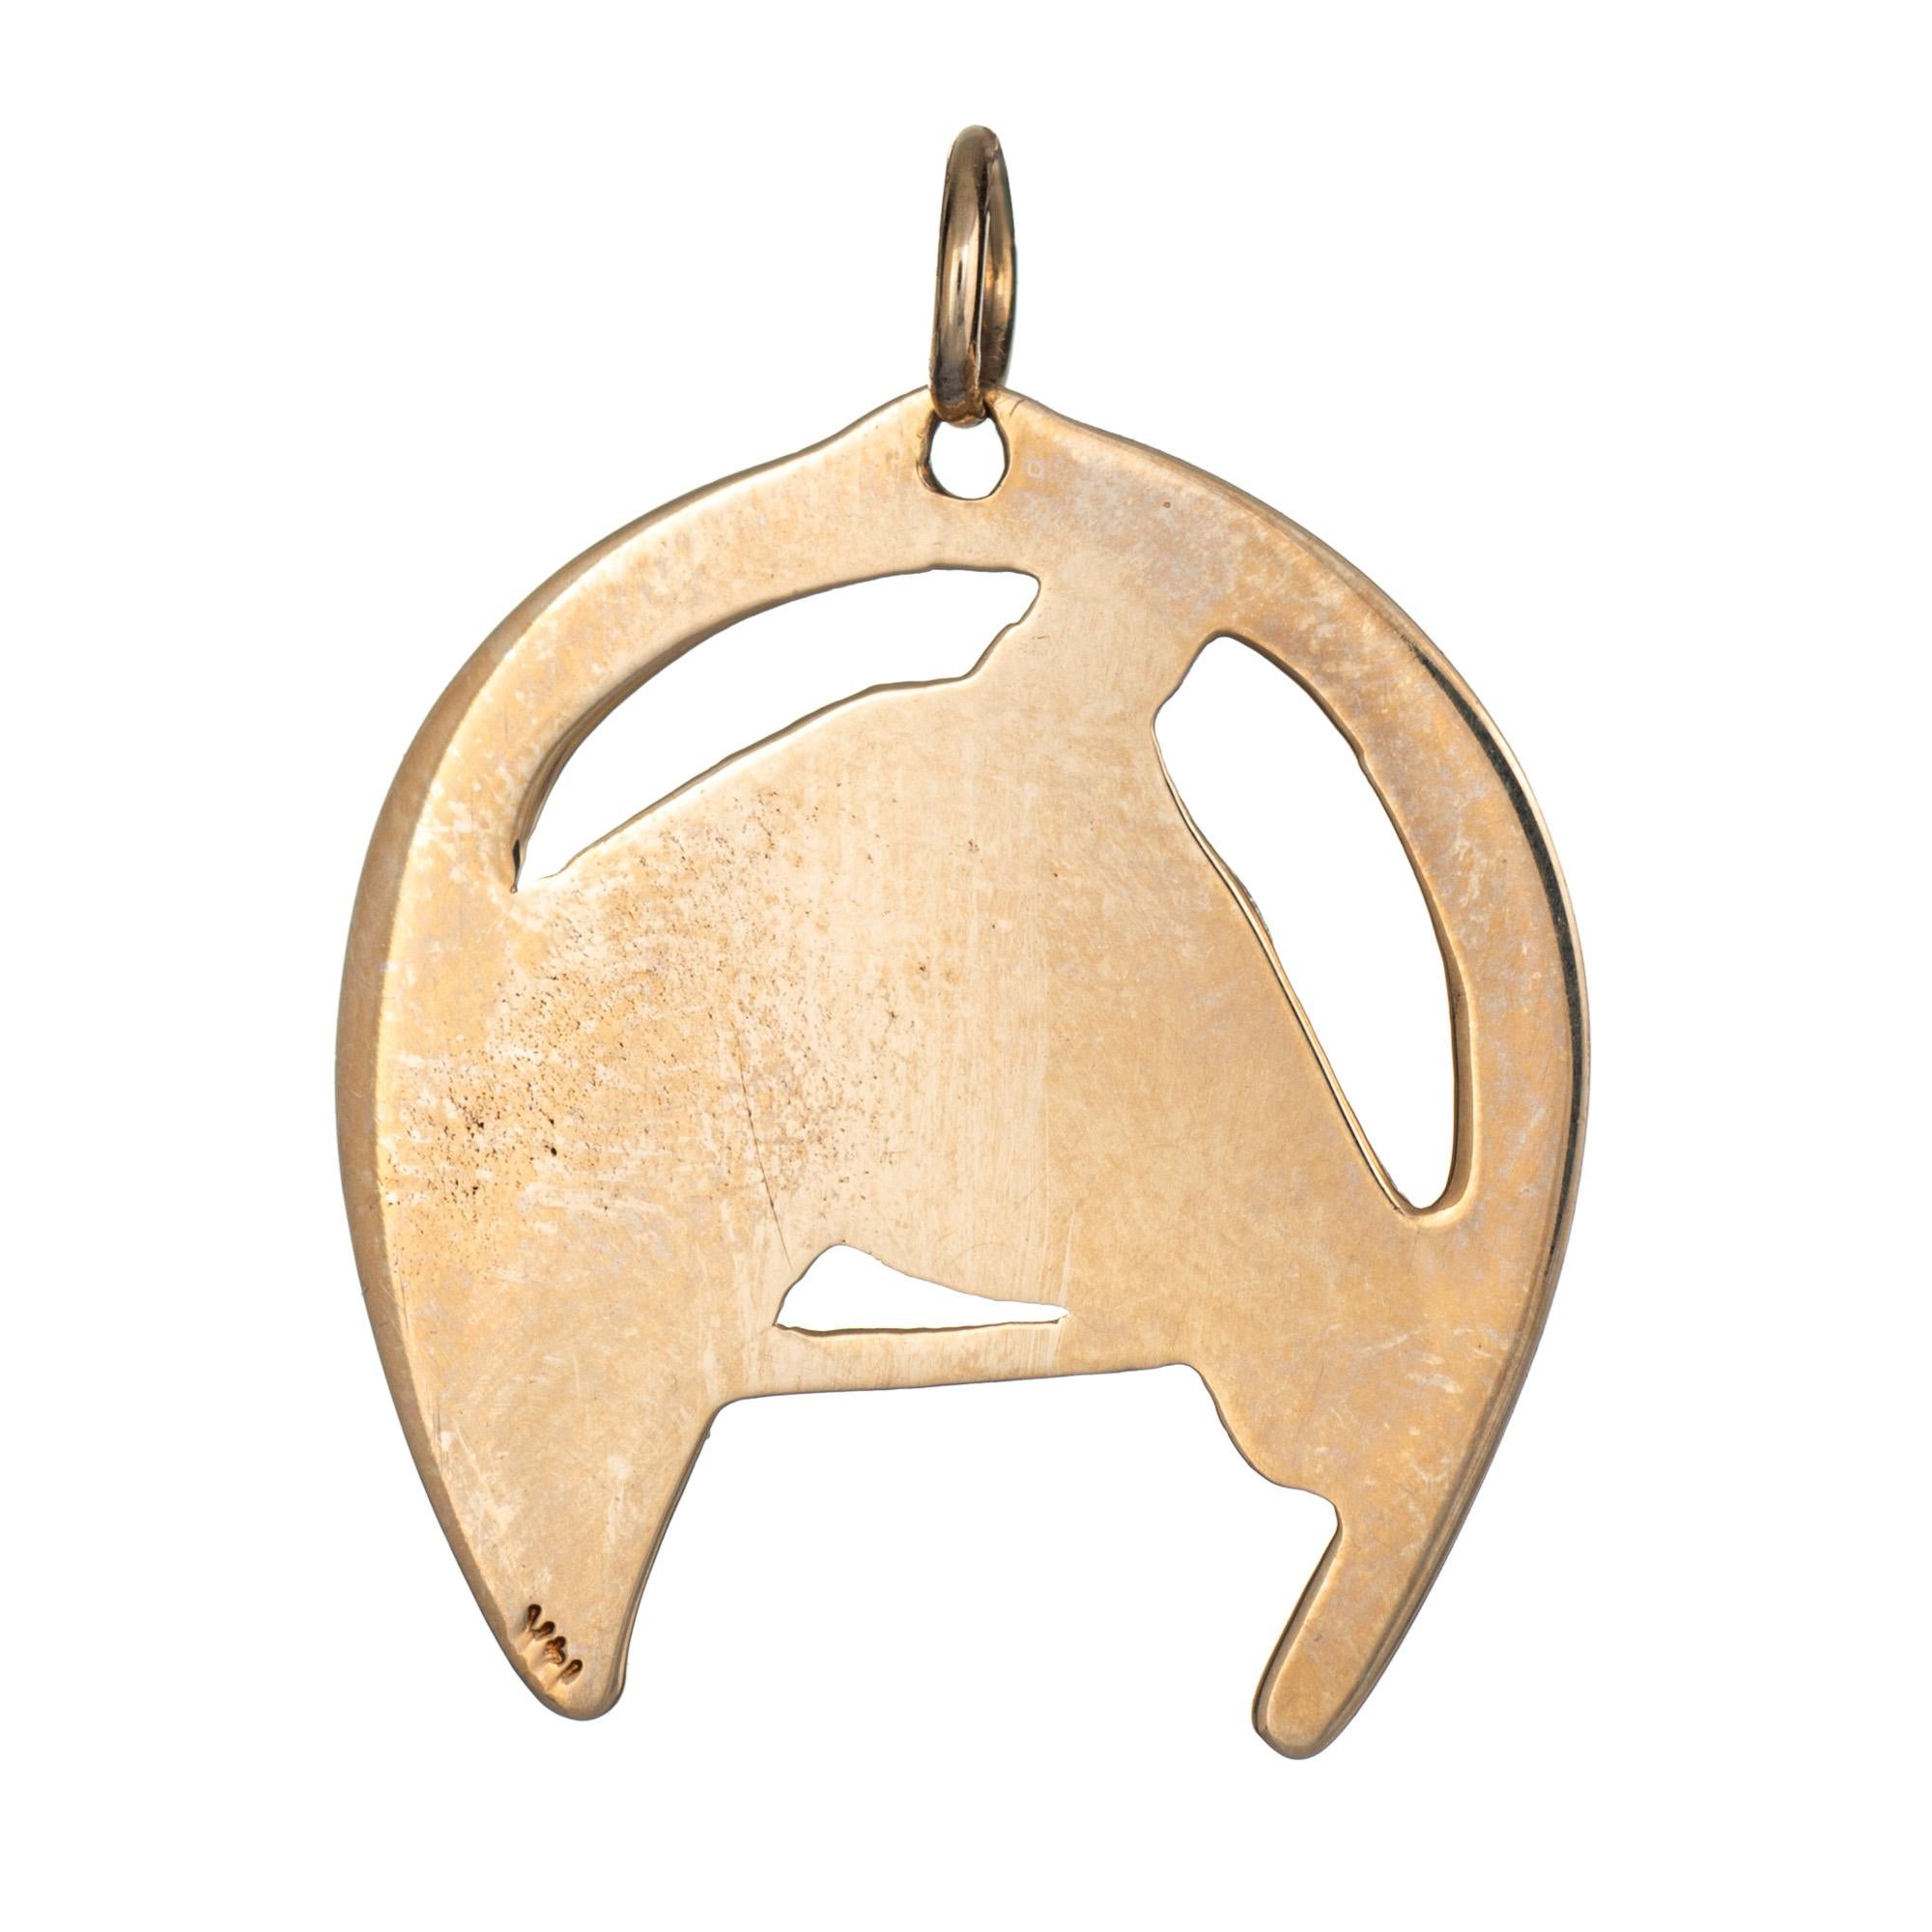 Finely detailed vintage equine themed horse pendant crafted in 14 karat yellow gold (circa 1960s to 1970s). 

The bust of a horse is framed with a good luck horseshoe. The nicely detailed piece can be worn as a pendant or charm on a bracelet.  